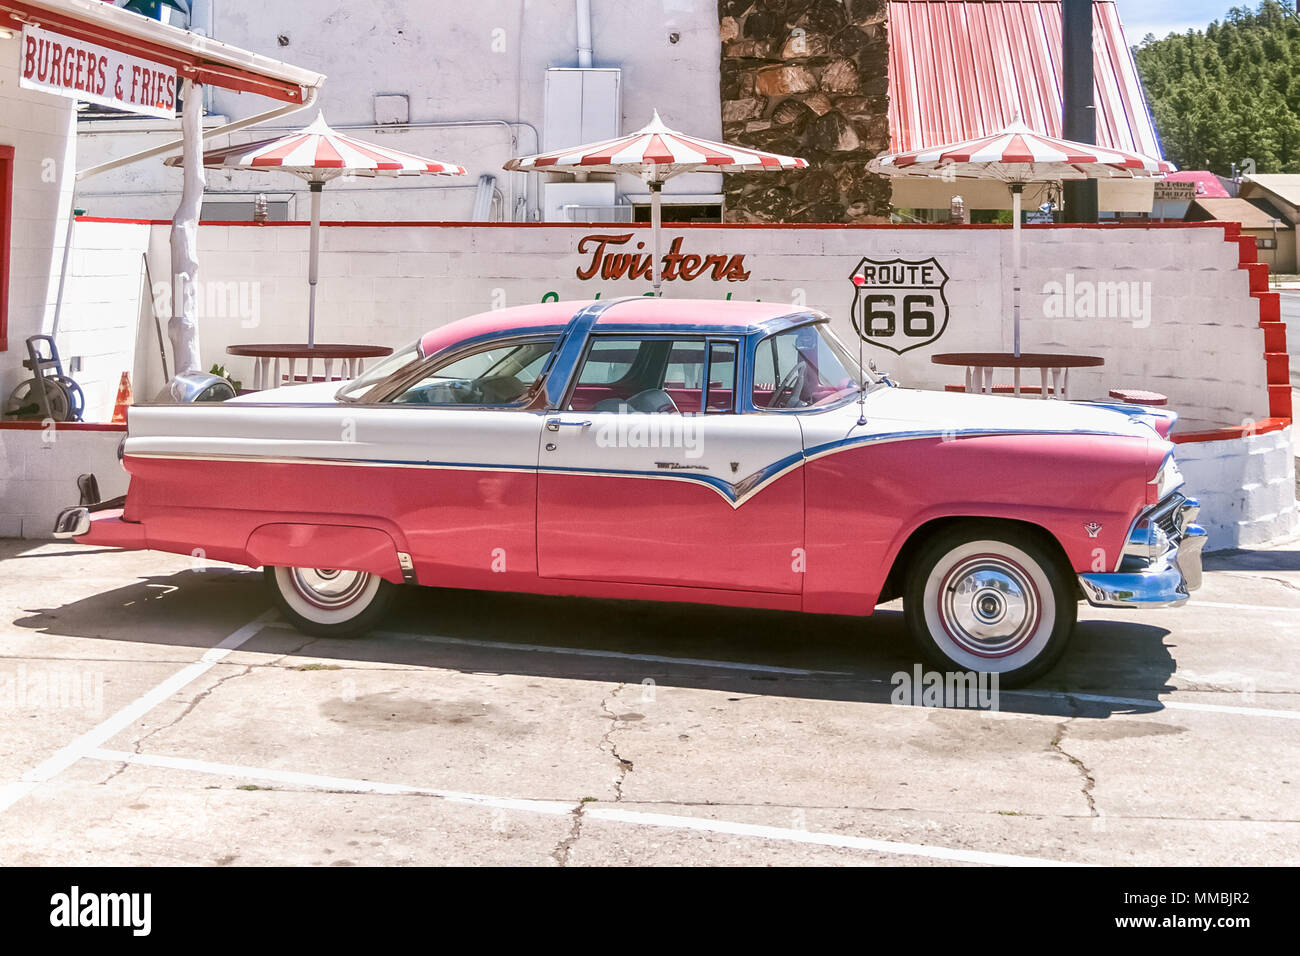 WILLIAMS, ARIZONA - JULY 3, 2007: Classic pink Ford Fairlane Crown Victoria (1955) parked in front the Route 66 Place and Twisters Restaurant in Willi Stock Photo